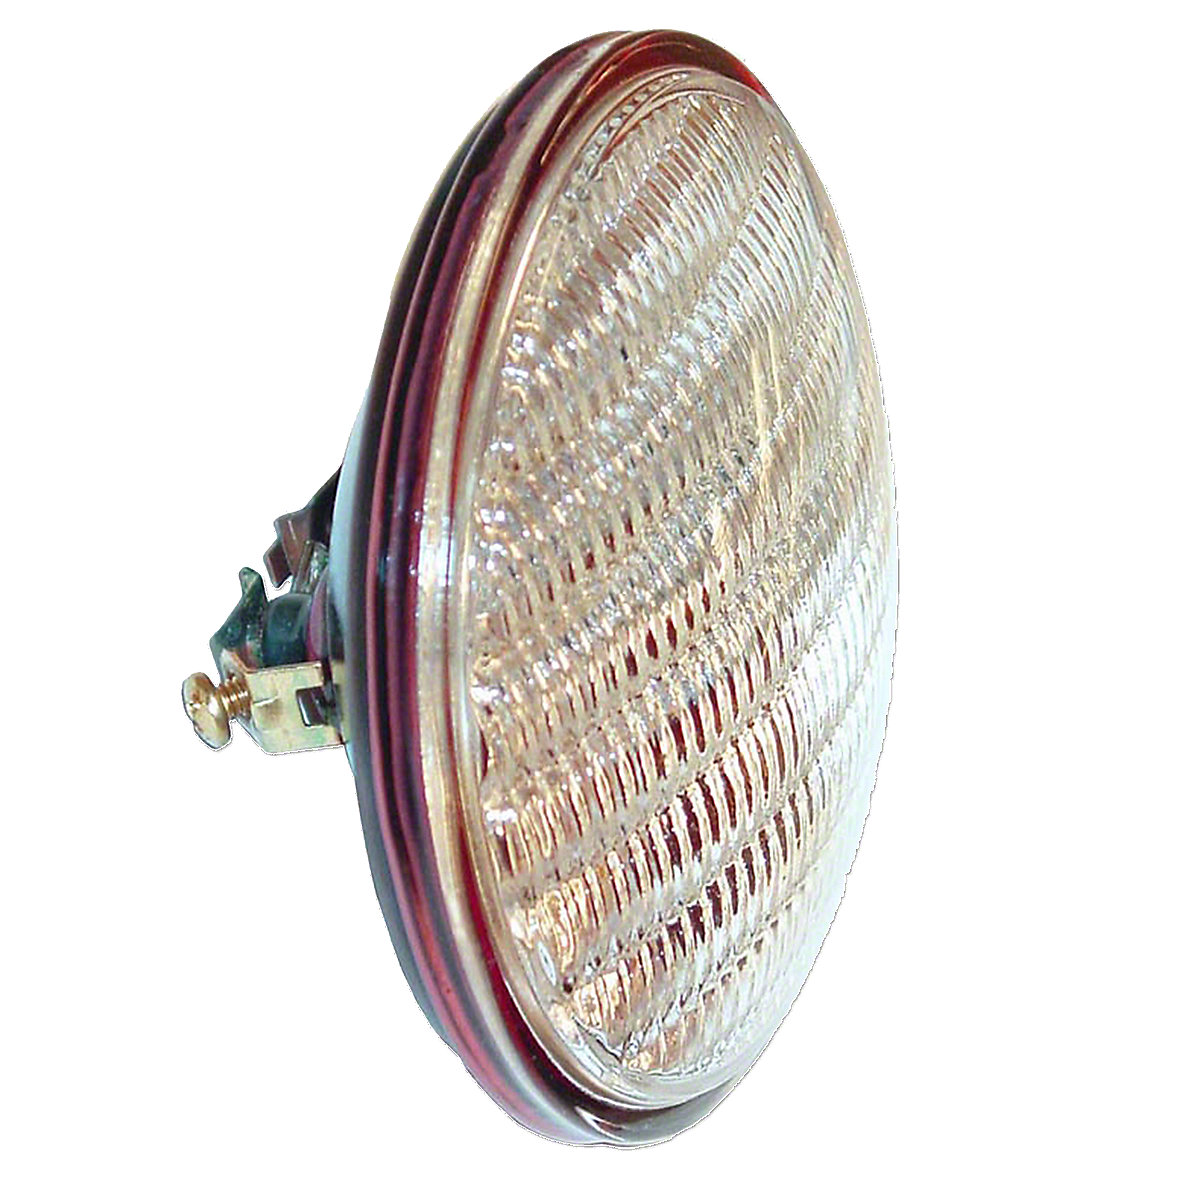 Universal 12 Volt Sealed Beam Combo Rear Light Bulb With Transparent Red Back Ground Using Separate Bulb For: Massey Harris And Massey Ferguson Tractors.